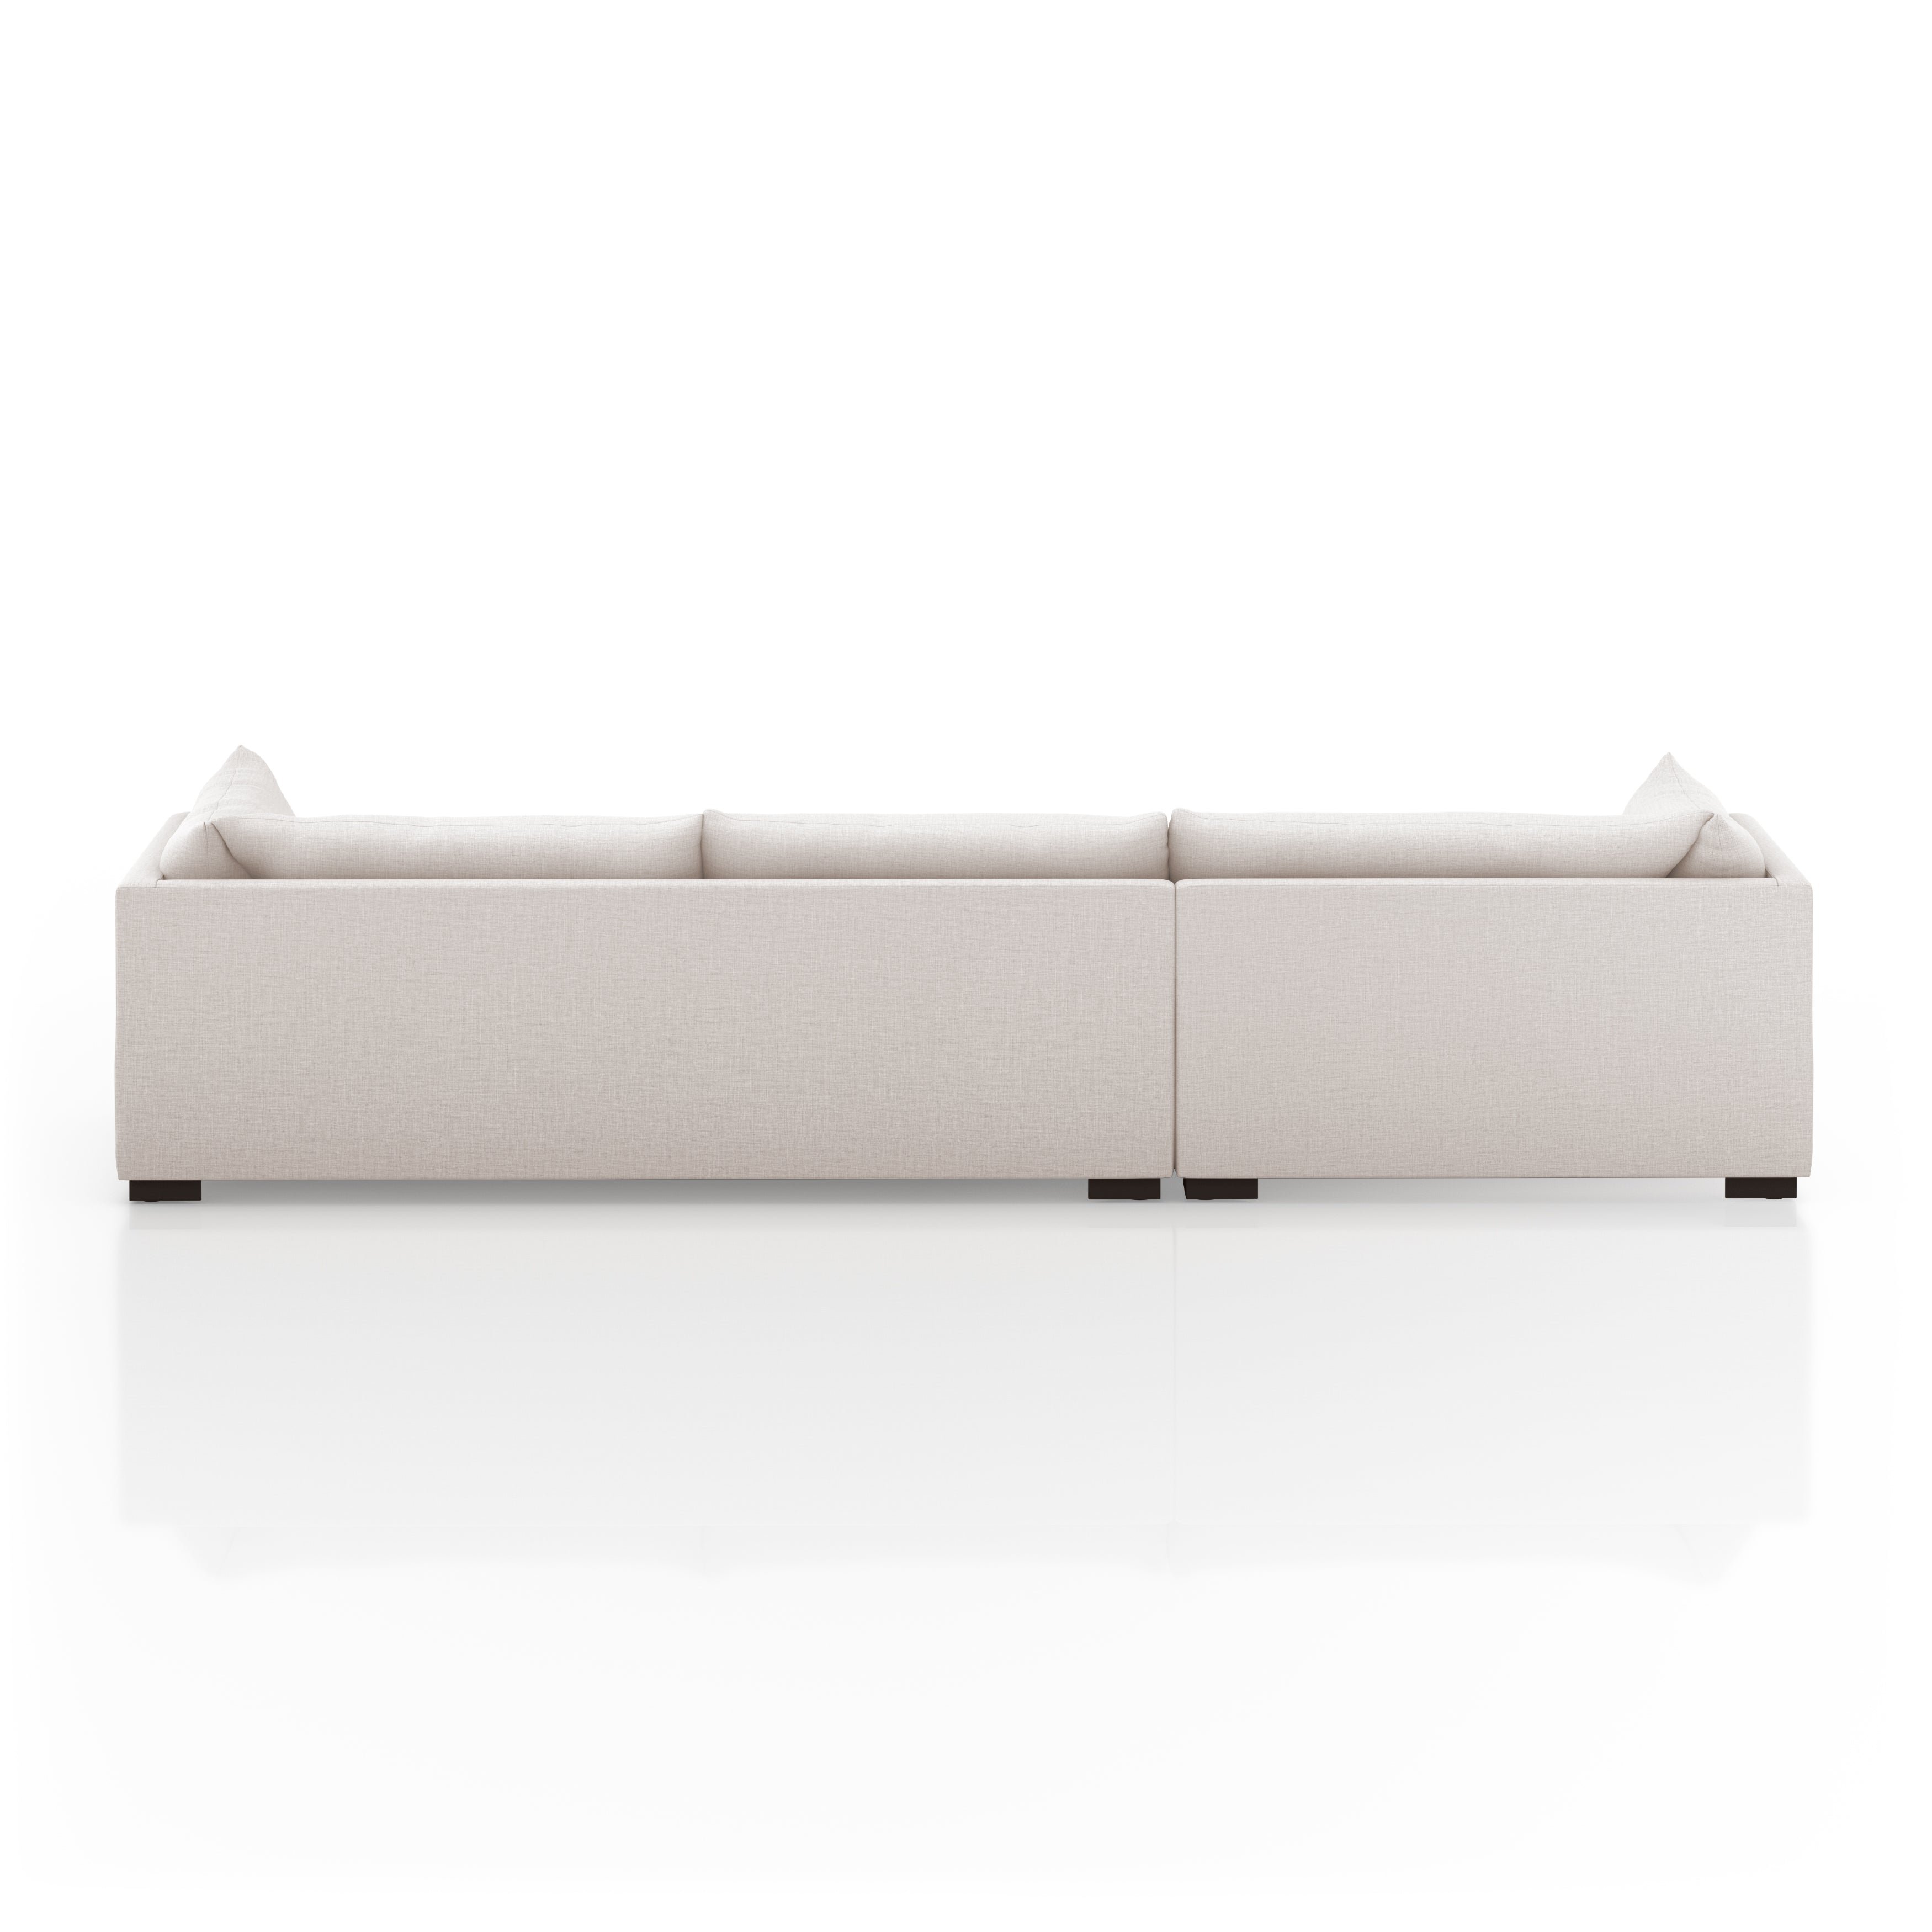 Westwood 2 Piece Sectional